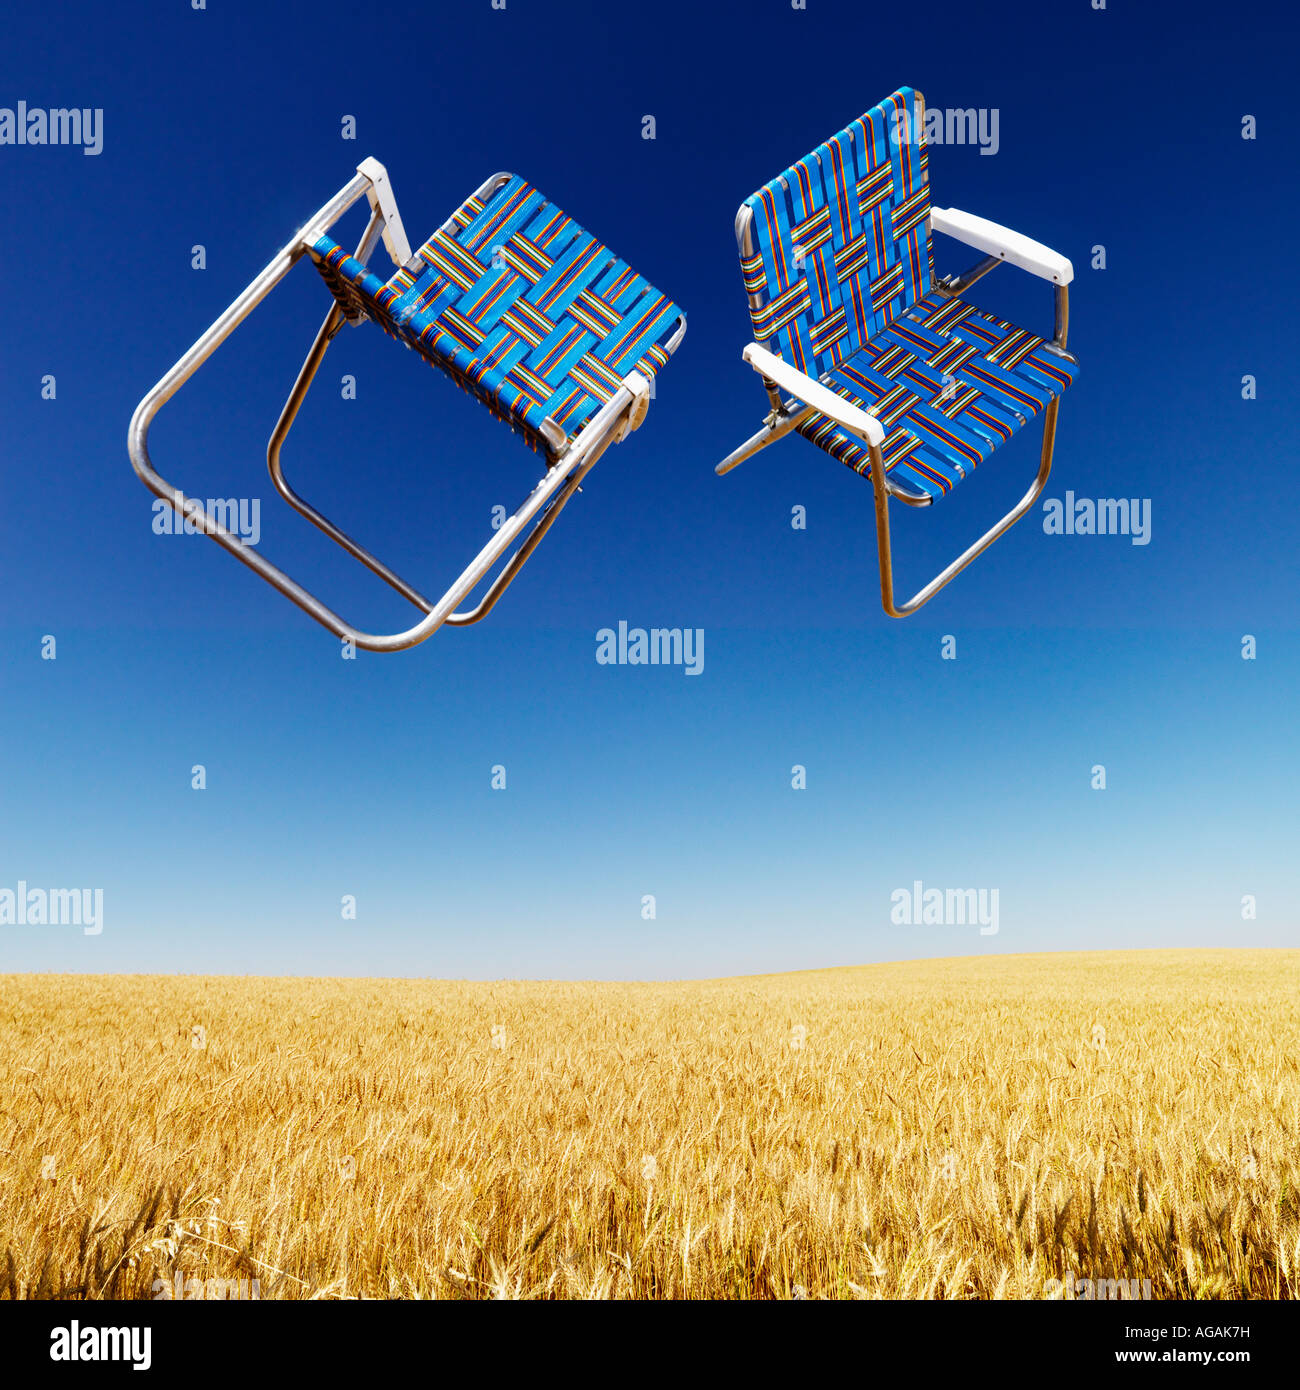 Two lawn chairs in mid air above a field of wheat with blue sky Stock Photo